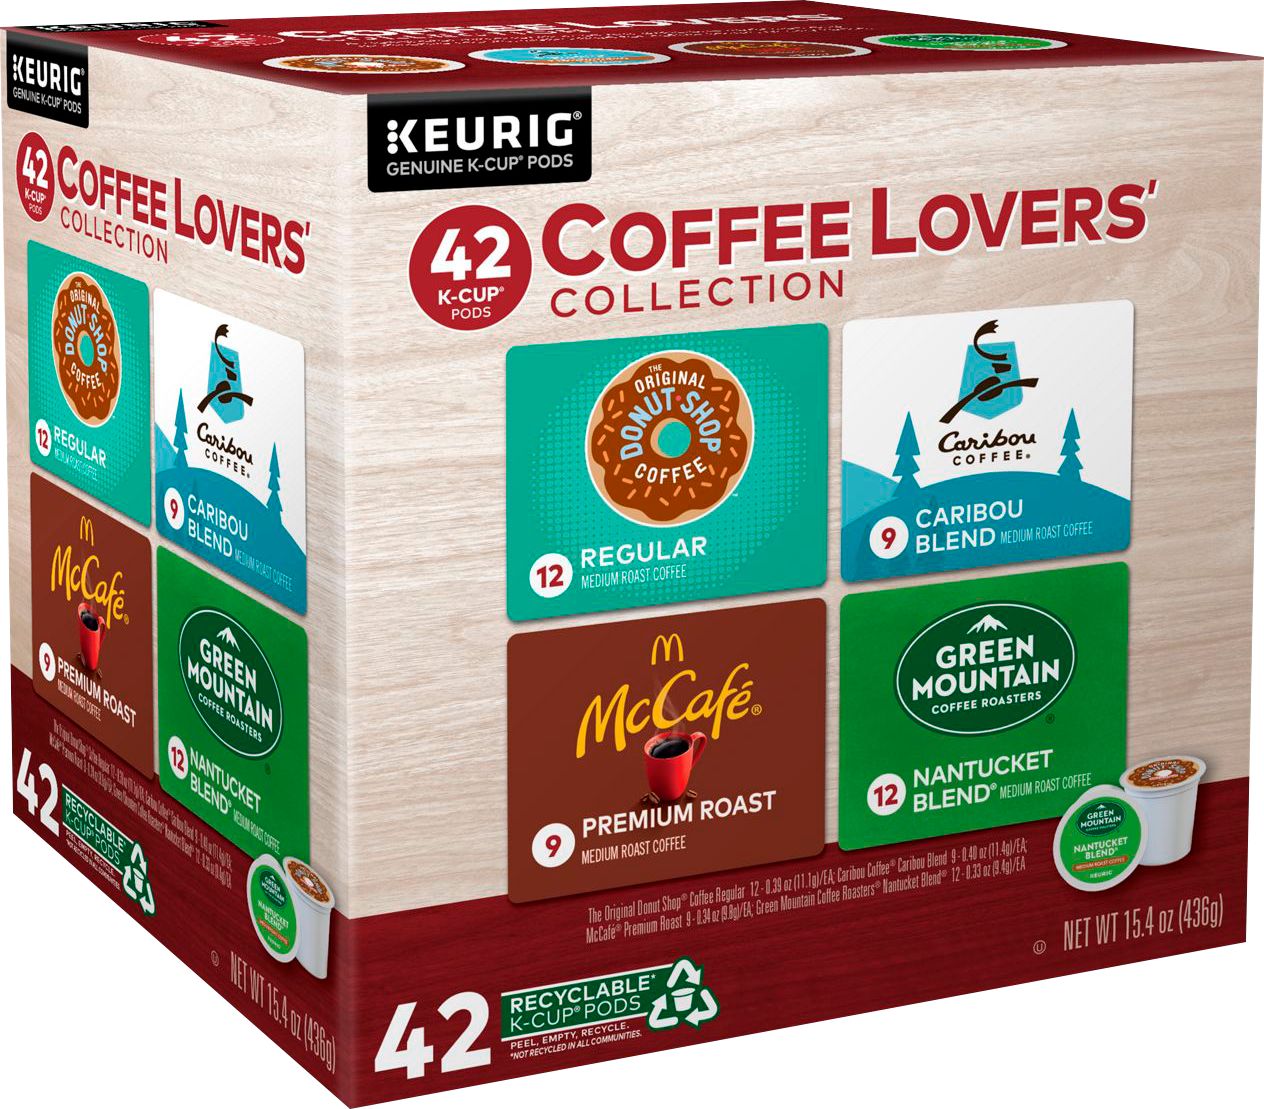 Angle View: Green Mountain Coffee - French Vanilla Coffee, Keurig Single-Serve K-Cup pods, Light Roast, 24 Count